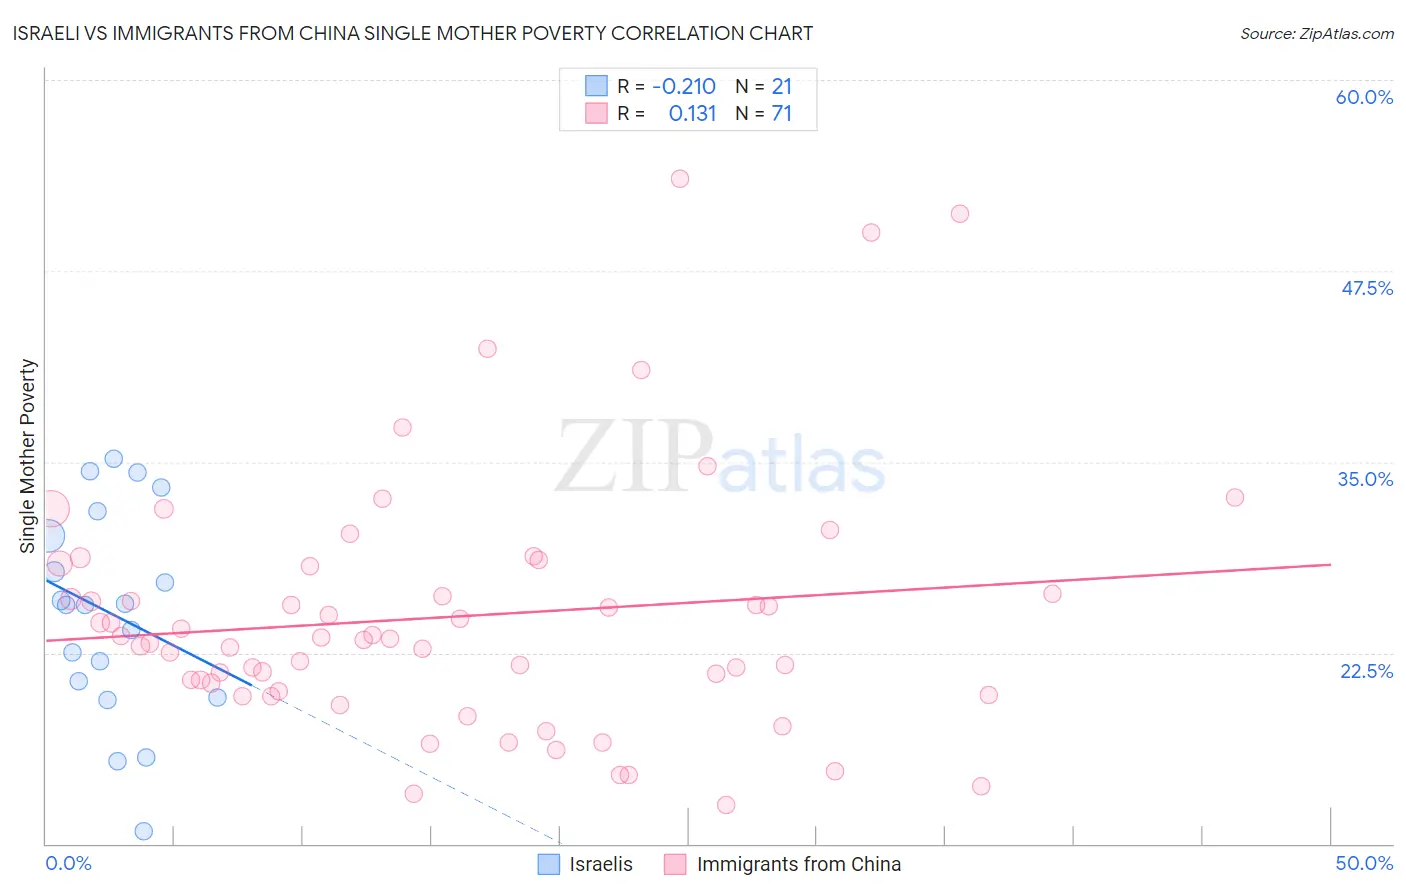 Israeli vs Immigrants from China Single Mother Poverty